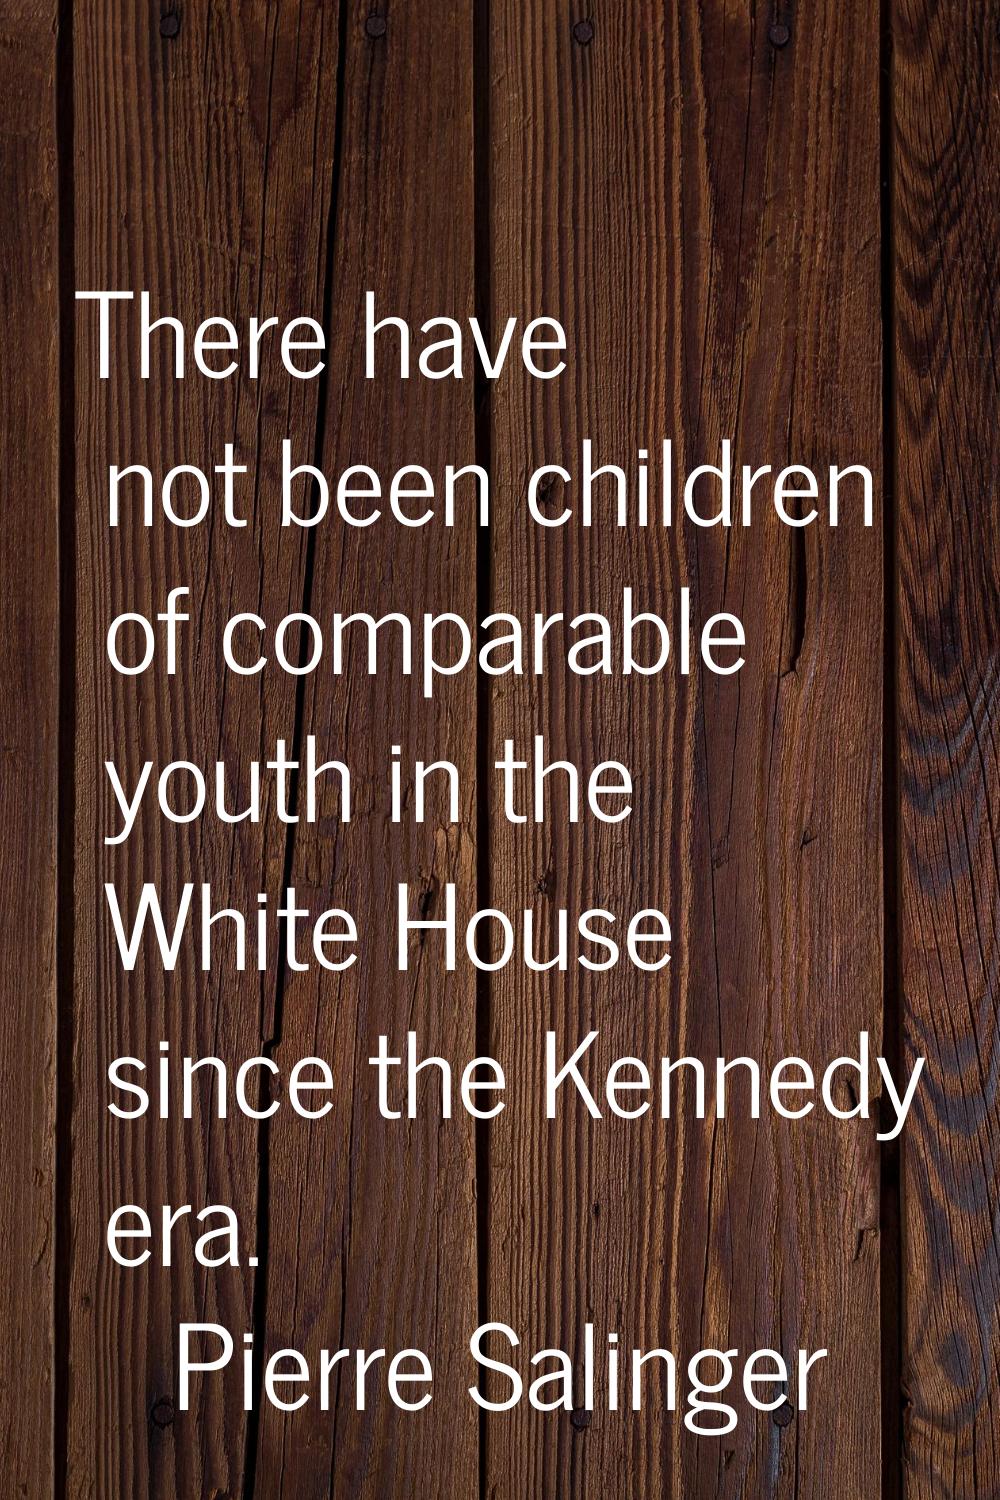 There have not been children of comparable youth in the White House since the Kennedy era.